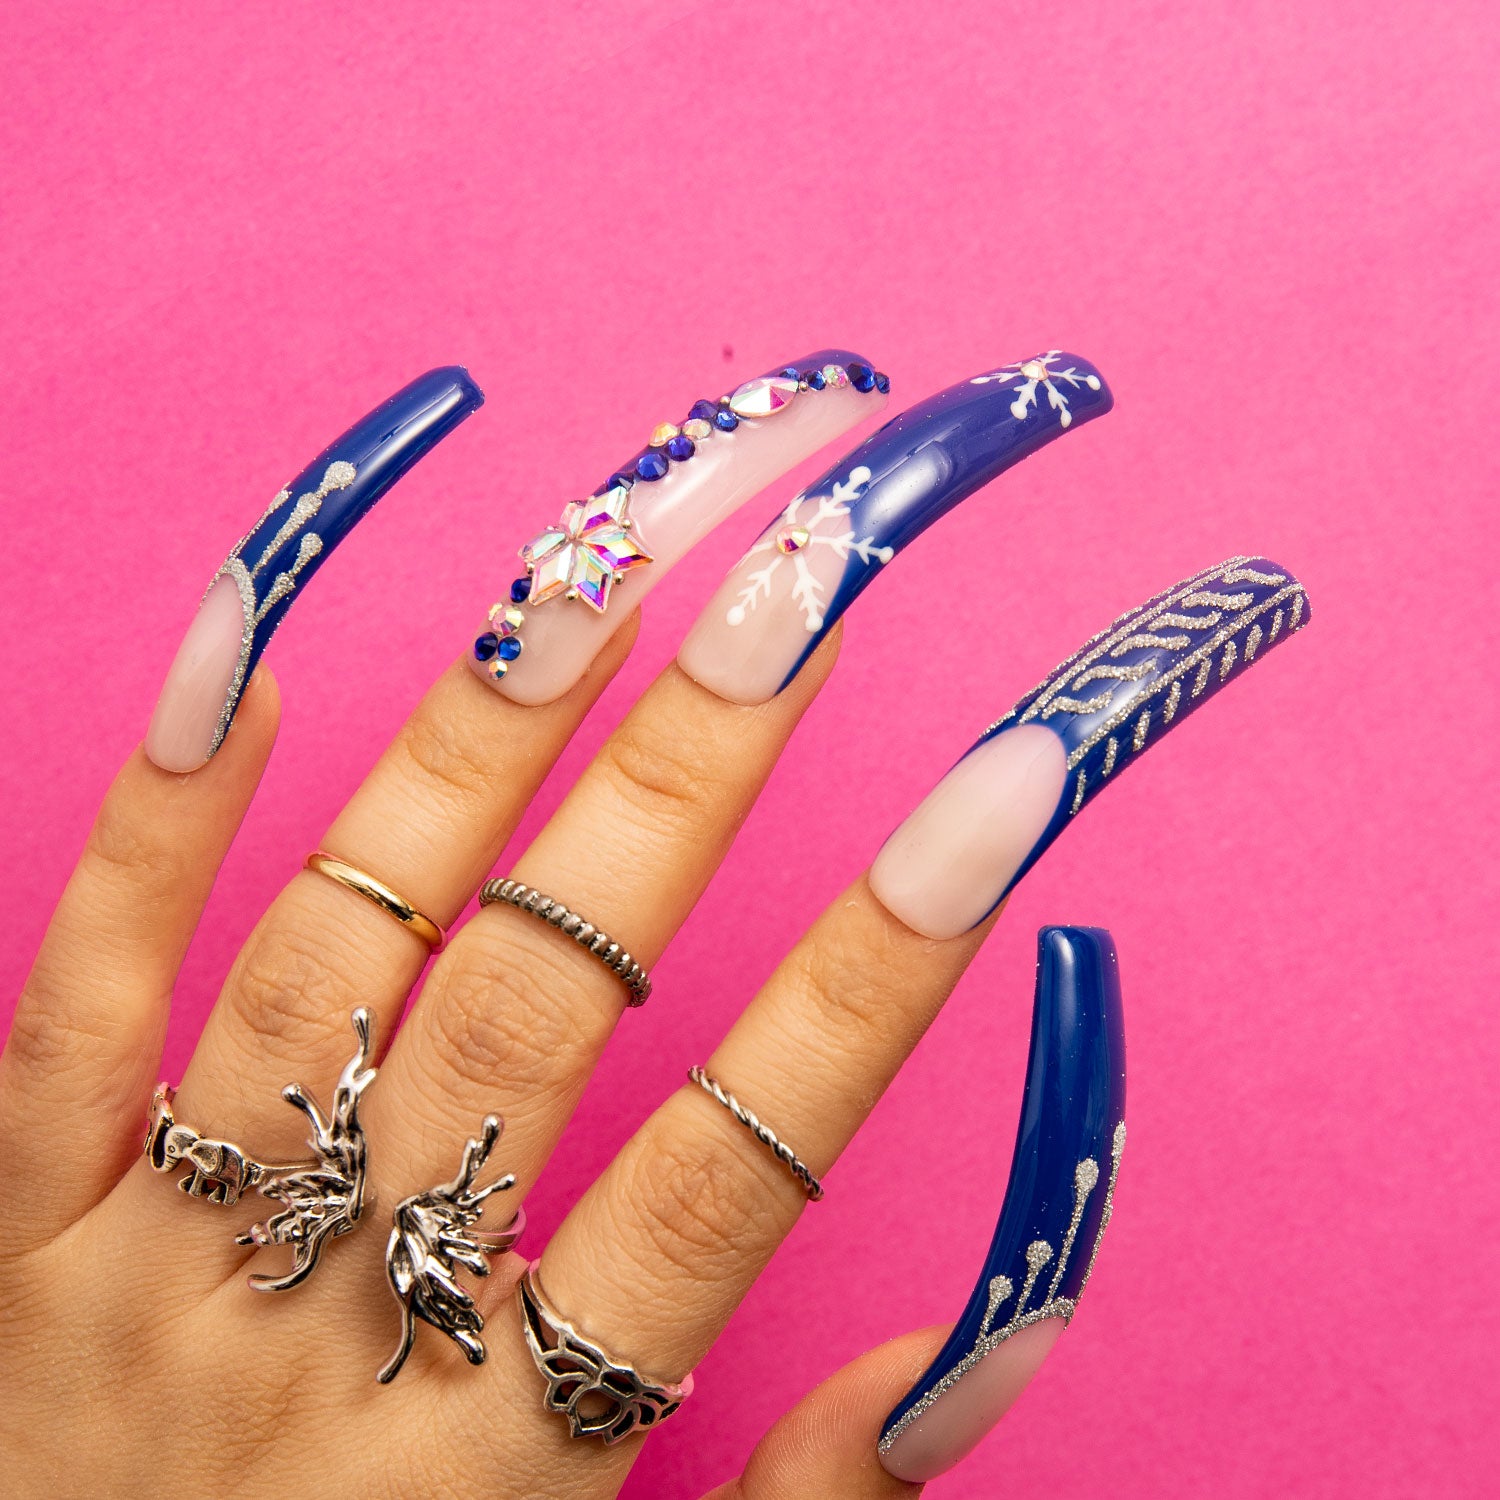 Hand with long blue French tip press-on nails featuring delicate white snowflake designs, jewelry-inspired decorations, and intricate patterns, from Lovful's Snow Waltz collection.